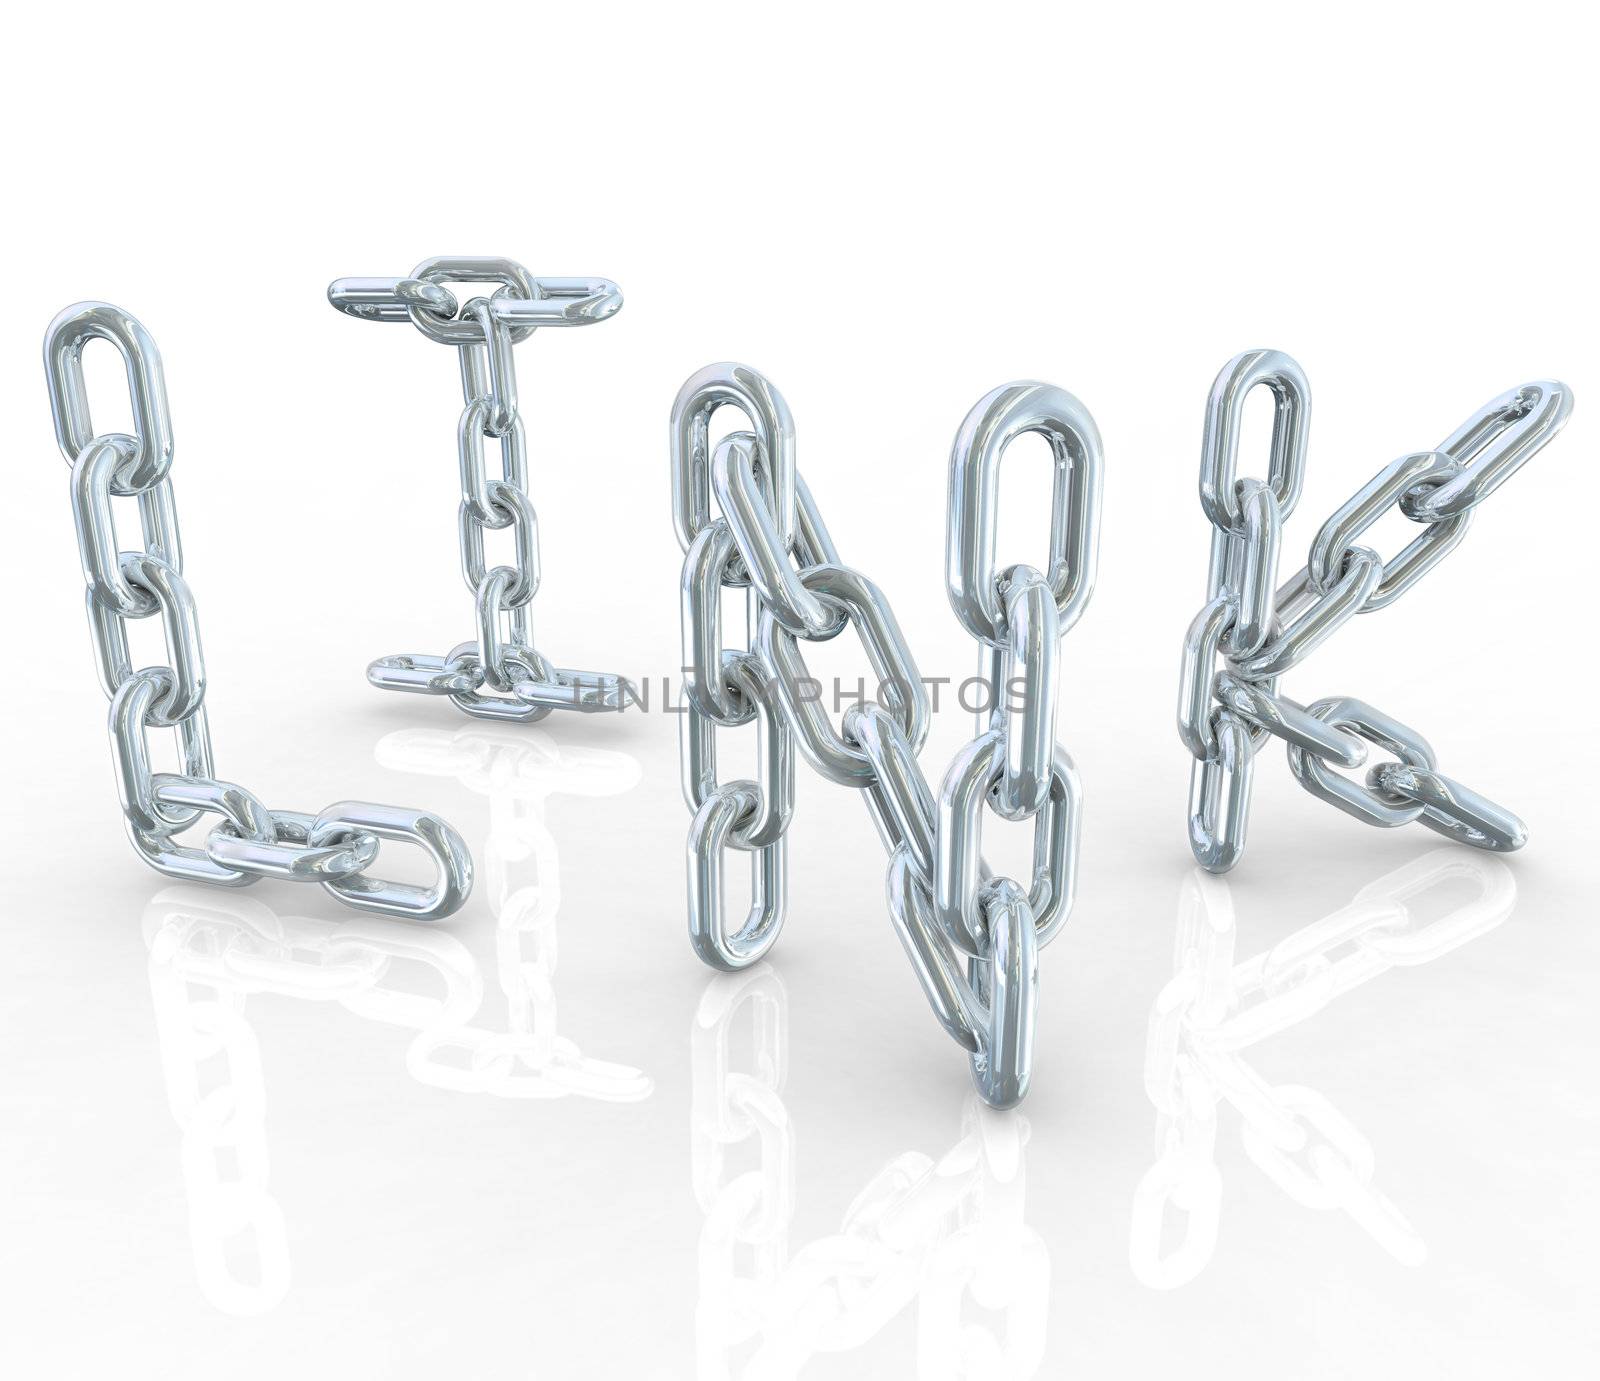 The word Link in shiny reflective metal chain links representing connections such as web referrals and business partnerships